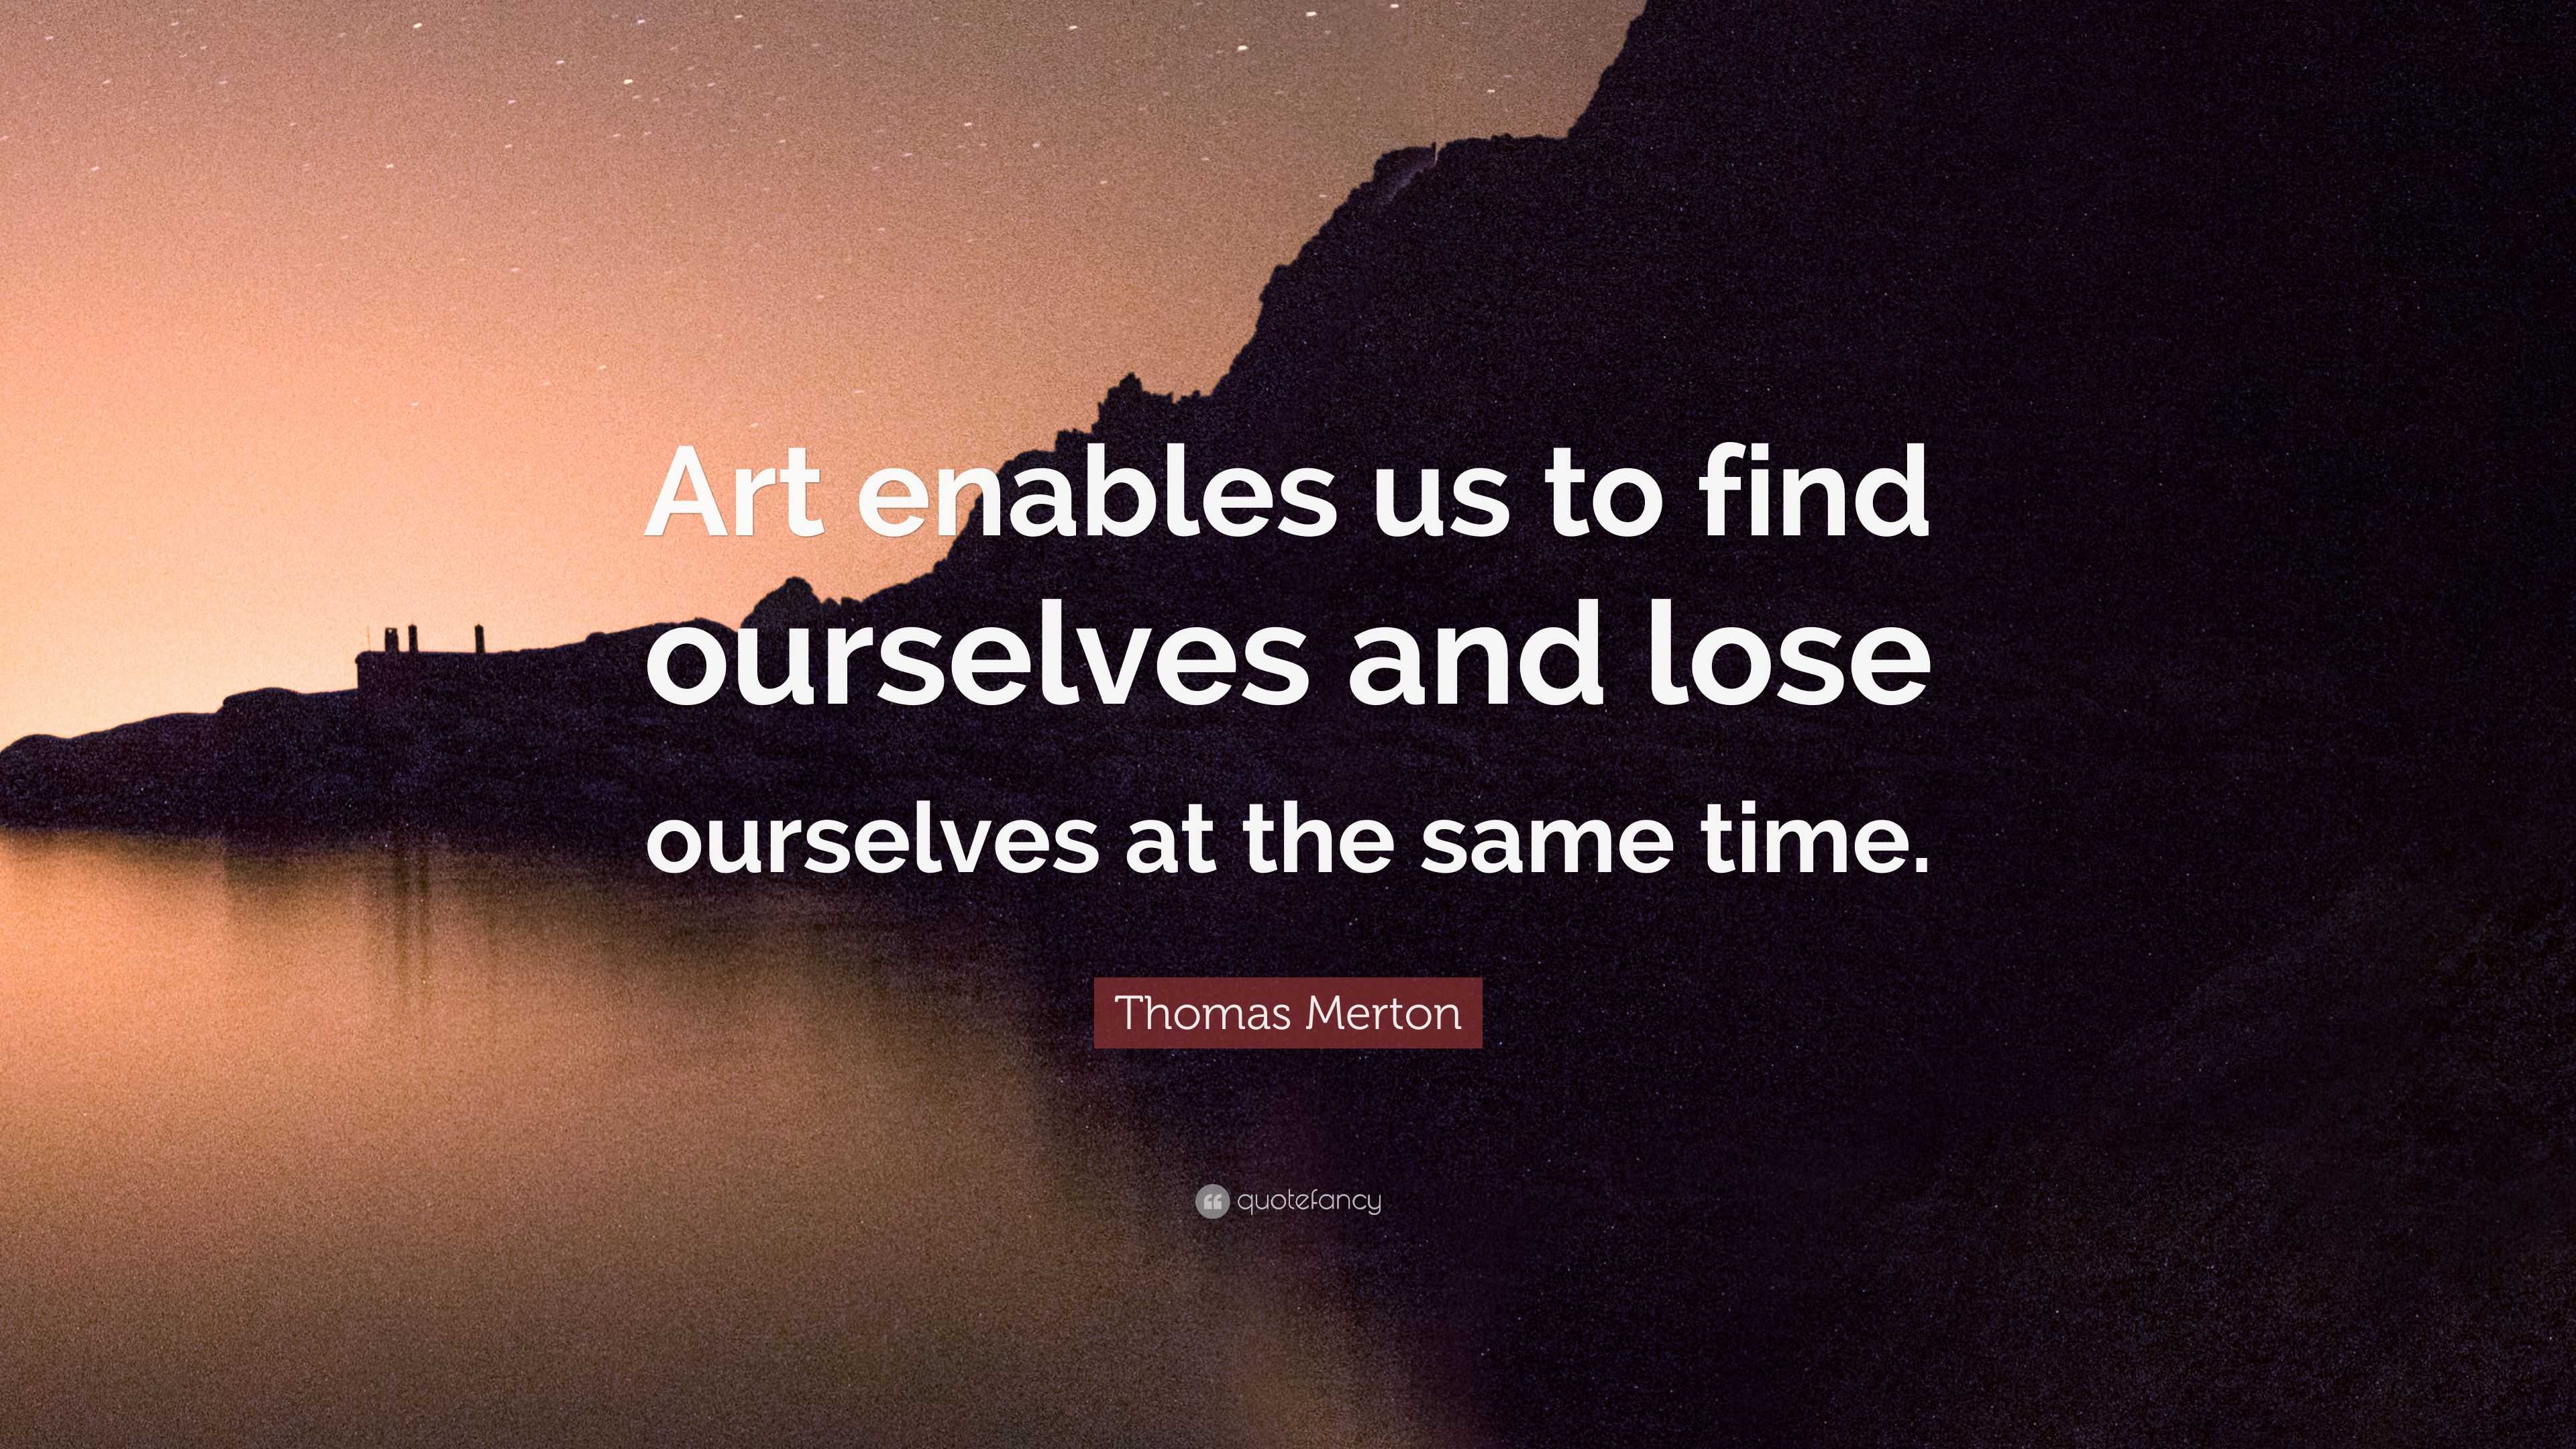 2019688 Thomas Merton Quote Art enables us to find ourselves and lose